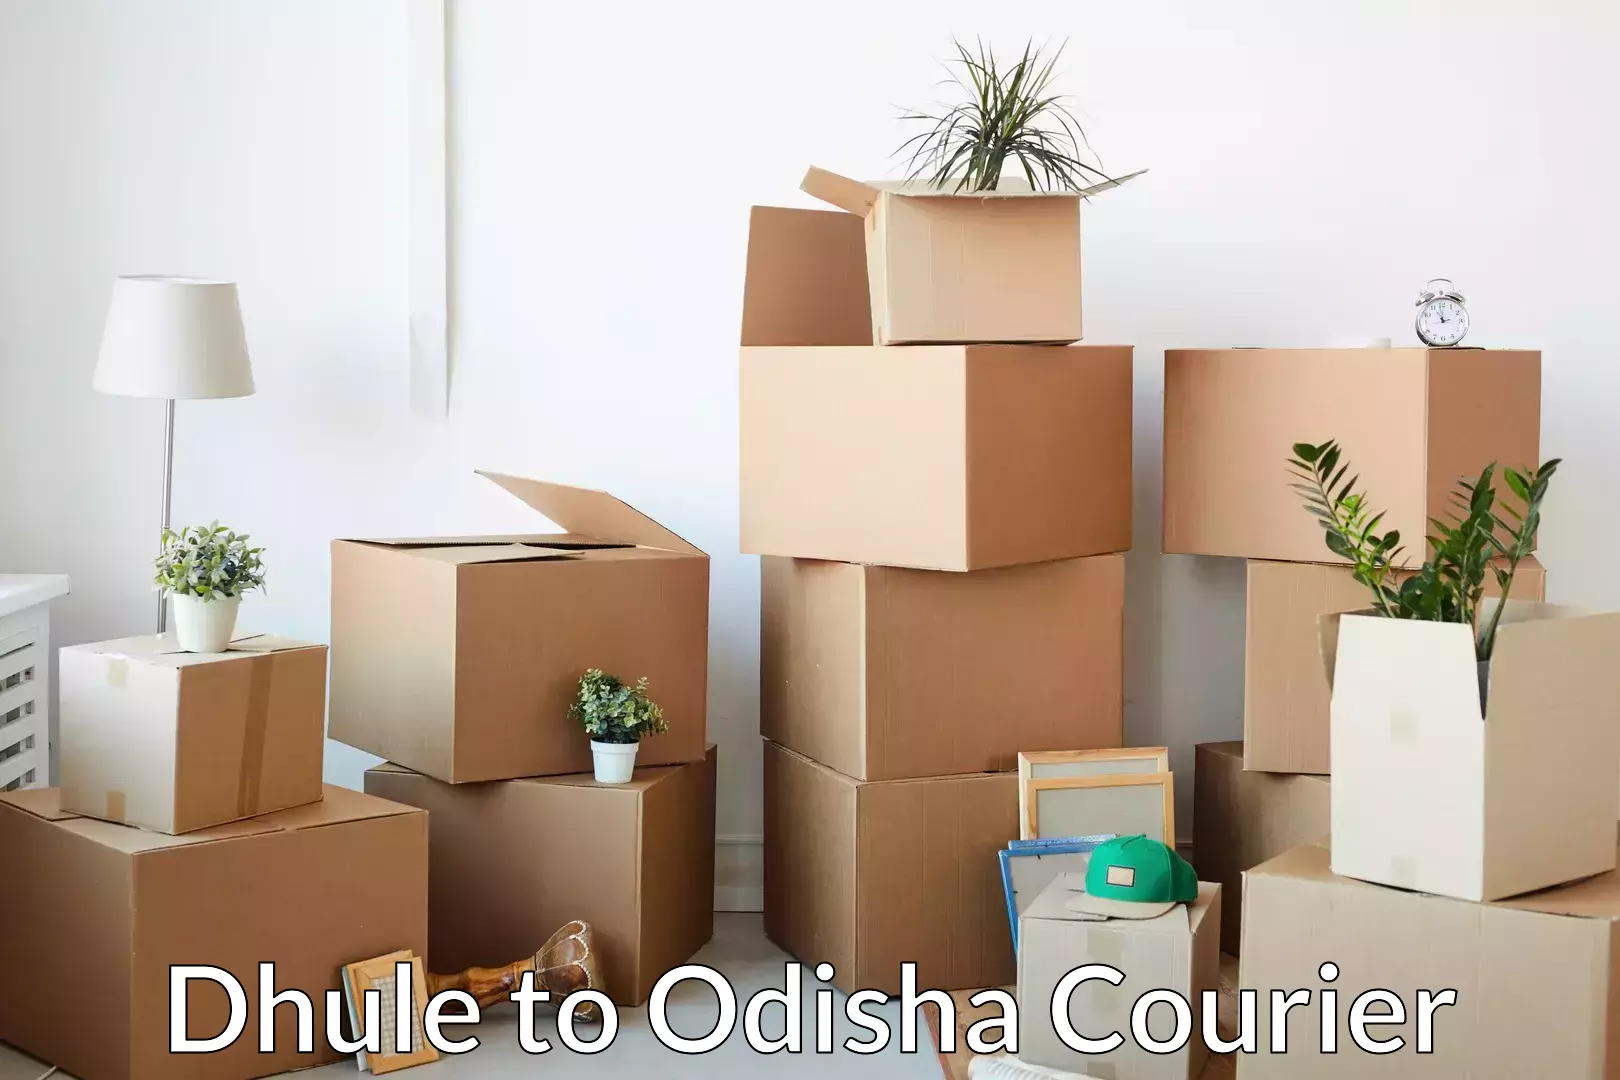 Budget-friendly movers Dhule to Bhubaneswar